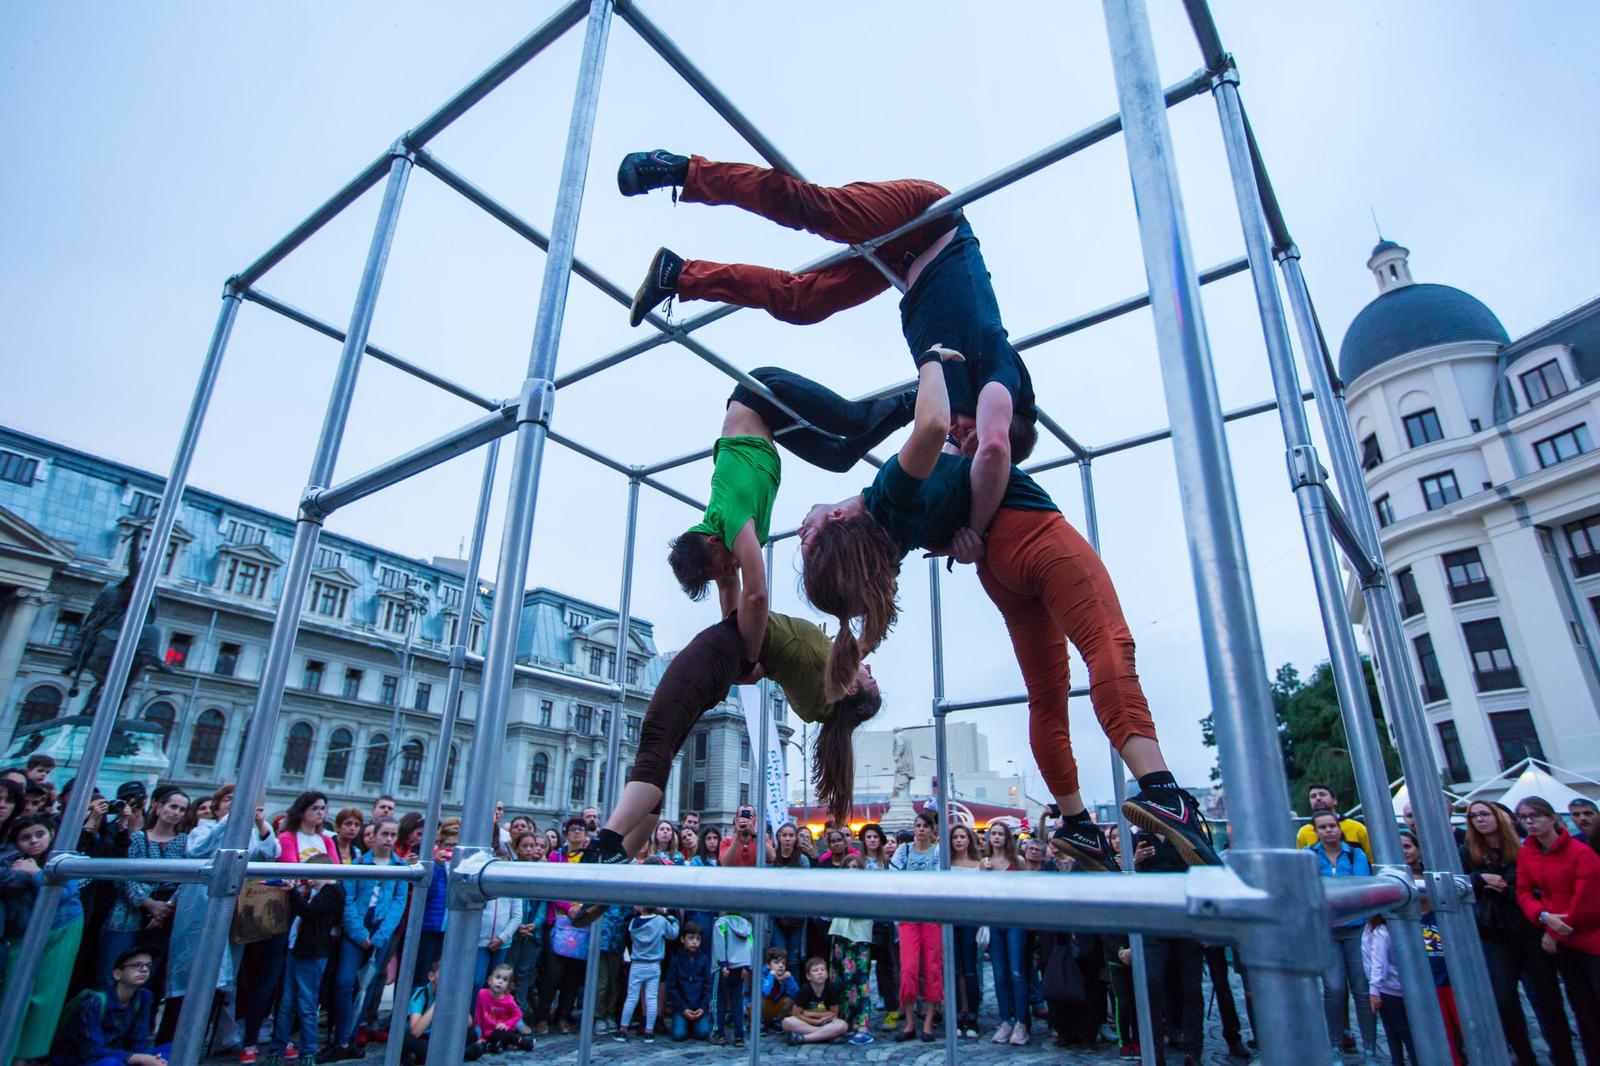 Motionhouse perform inside giant cage surrounded by standing audience and buildings